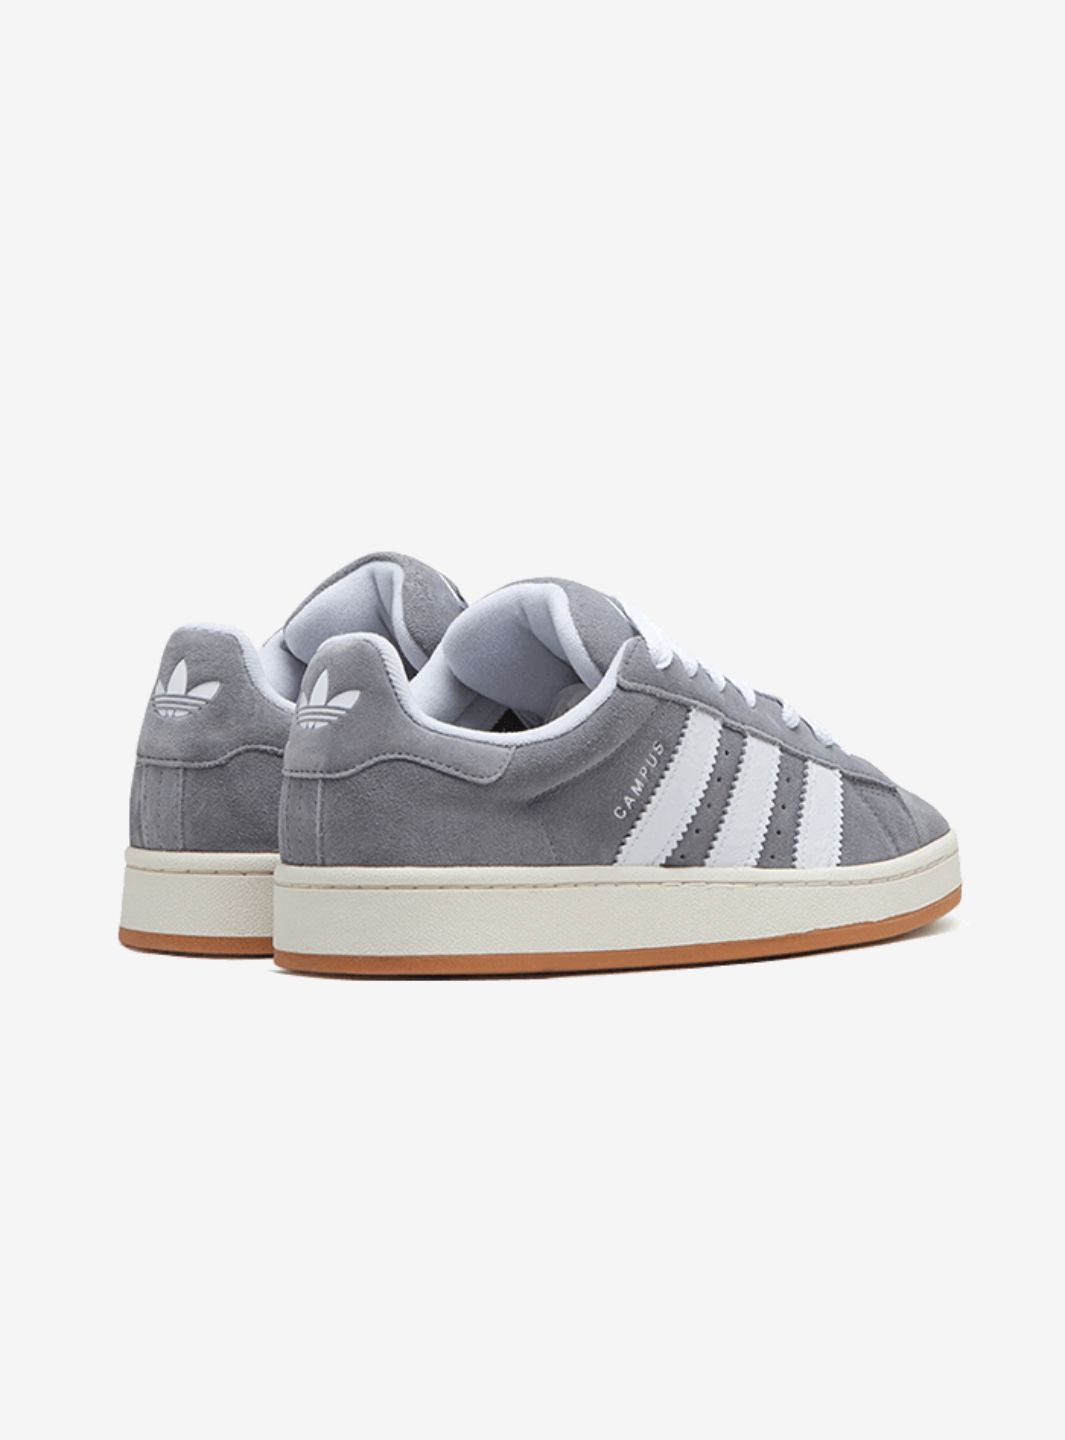 Adidas Campus 00s Grey White - HQ8707 | ResellZone